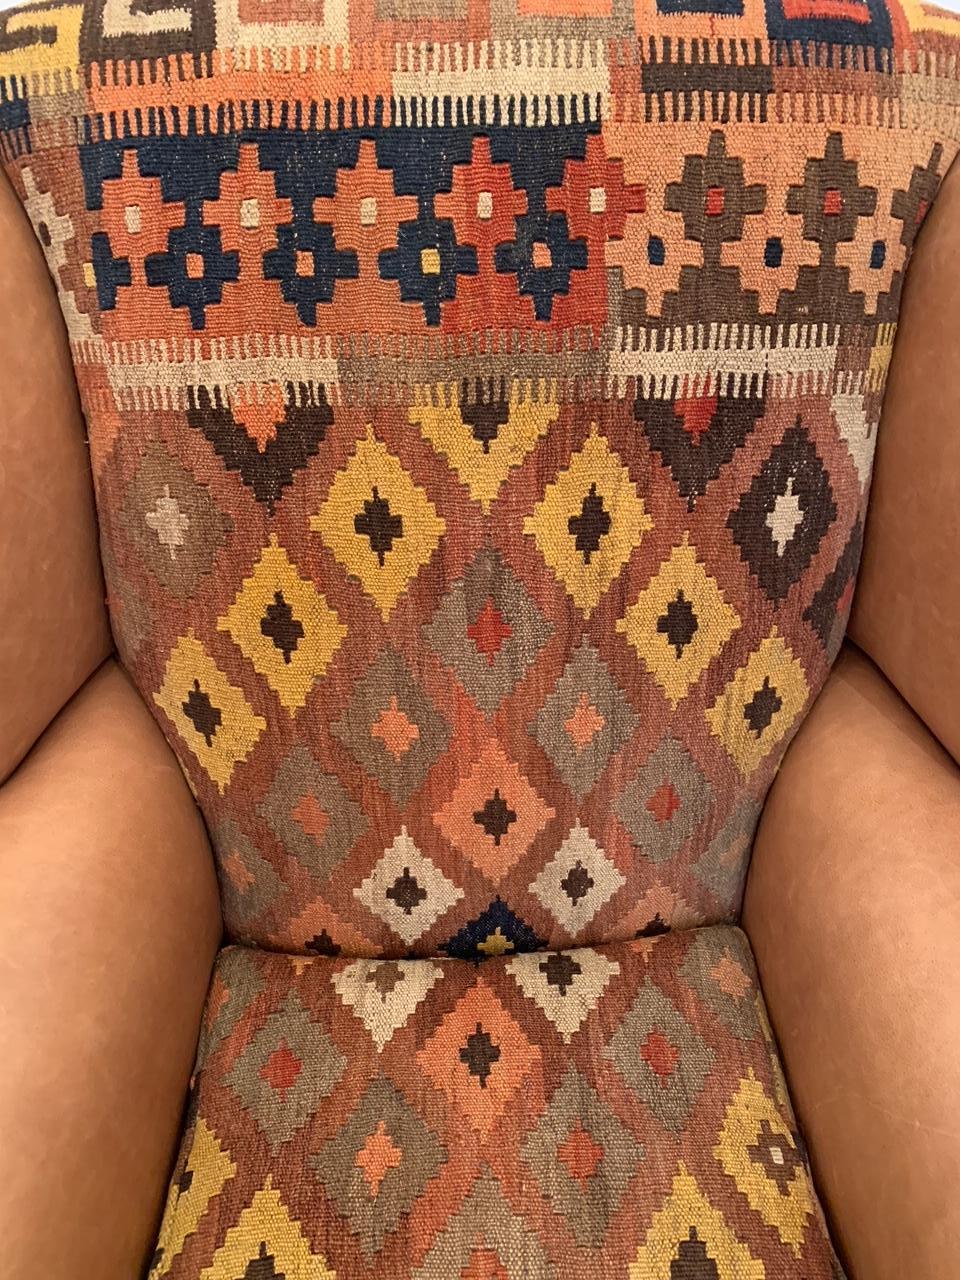 Handsome vintage wingback chair in new leather and vintage Kilim upholstery. The chair has mahogany legs and ball and claw feet.
Measures: Seat 22” D x 18.5” H.
  